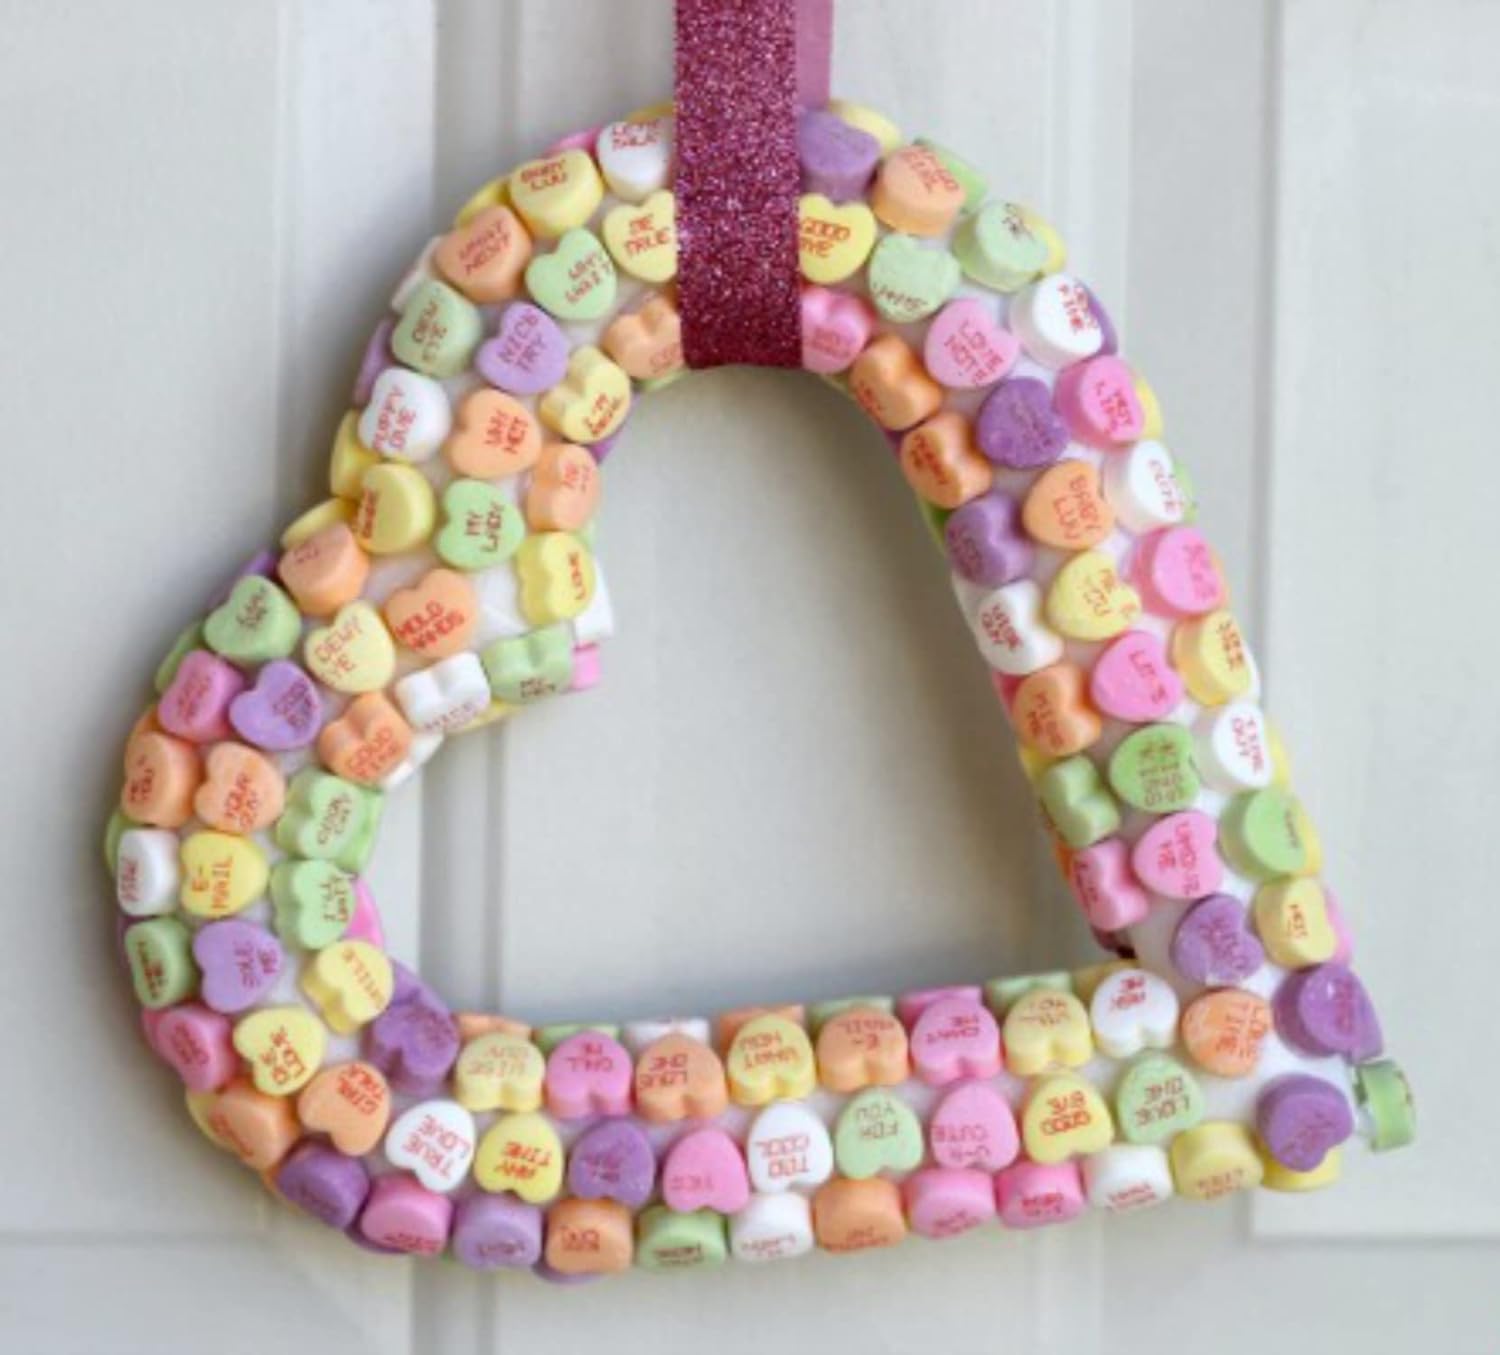 Small Candy Conversation Hearts, 2.5 Pound By The Cup Bag : Grocery & Gourmet Food